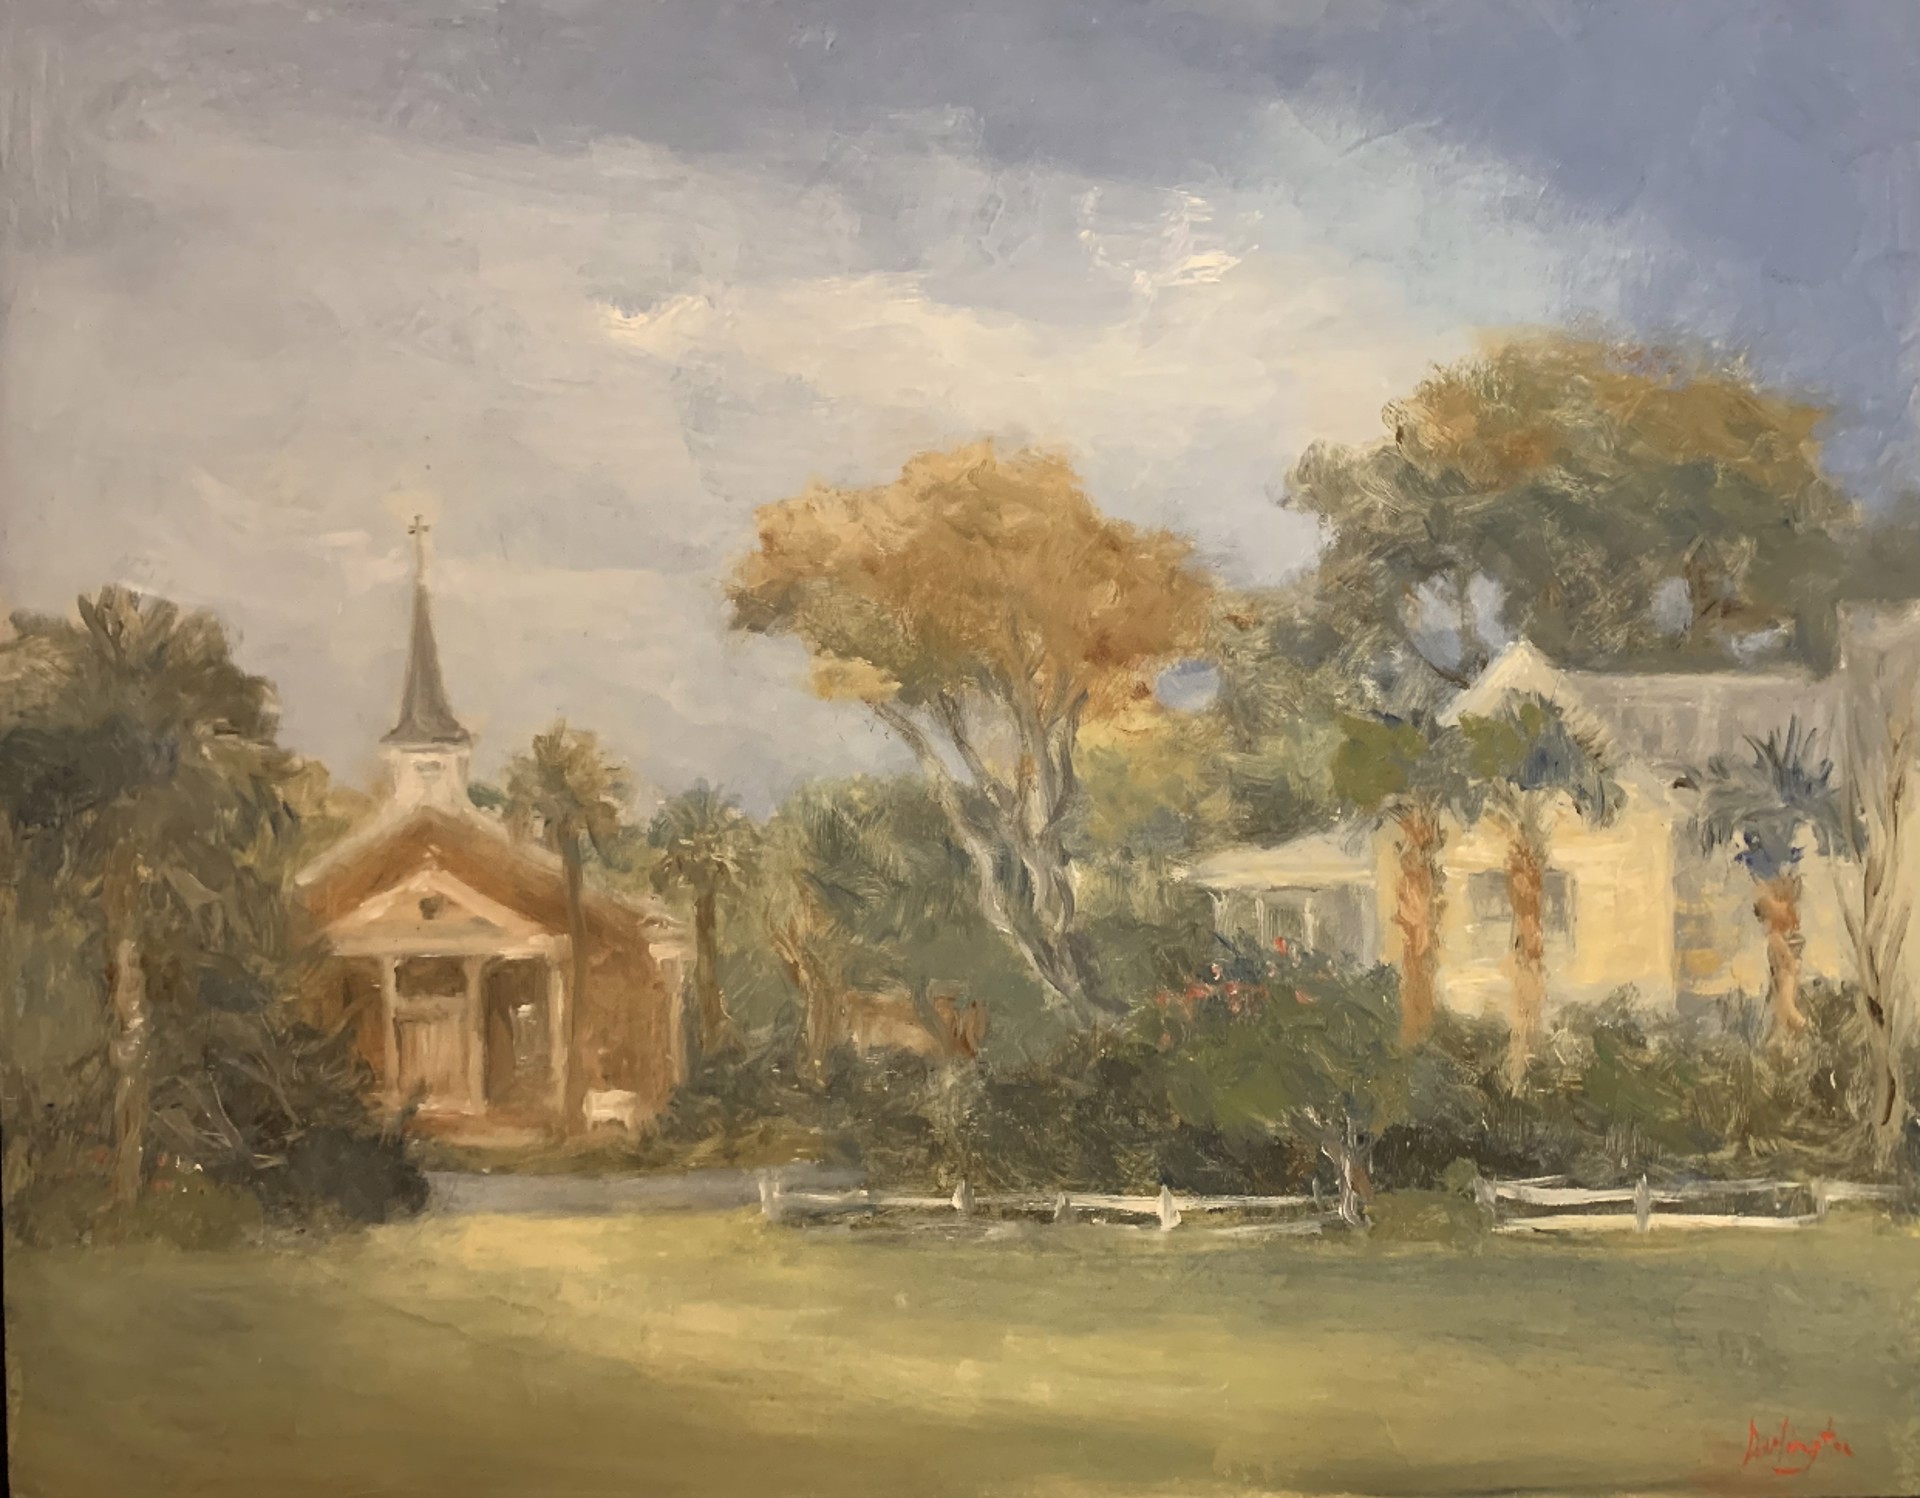 Baptist Church (View from Tennis Courts) by Jim Darlington